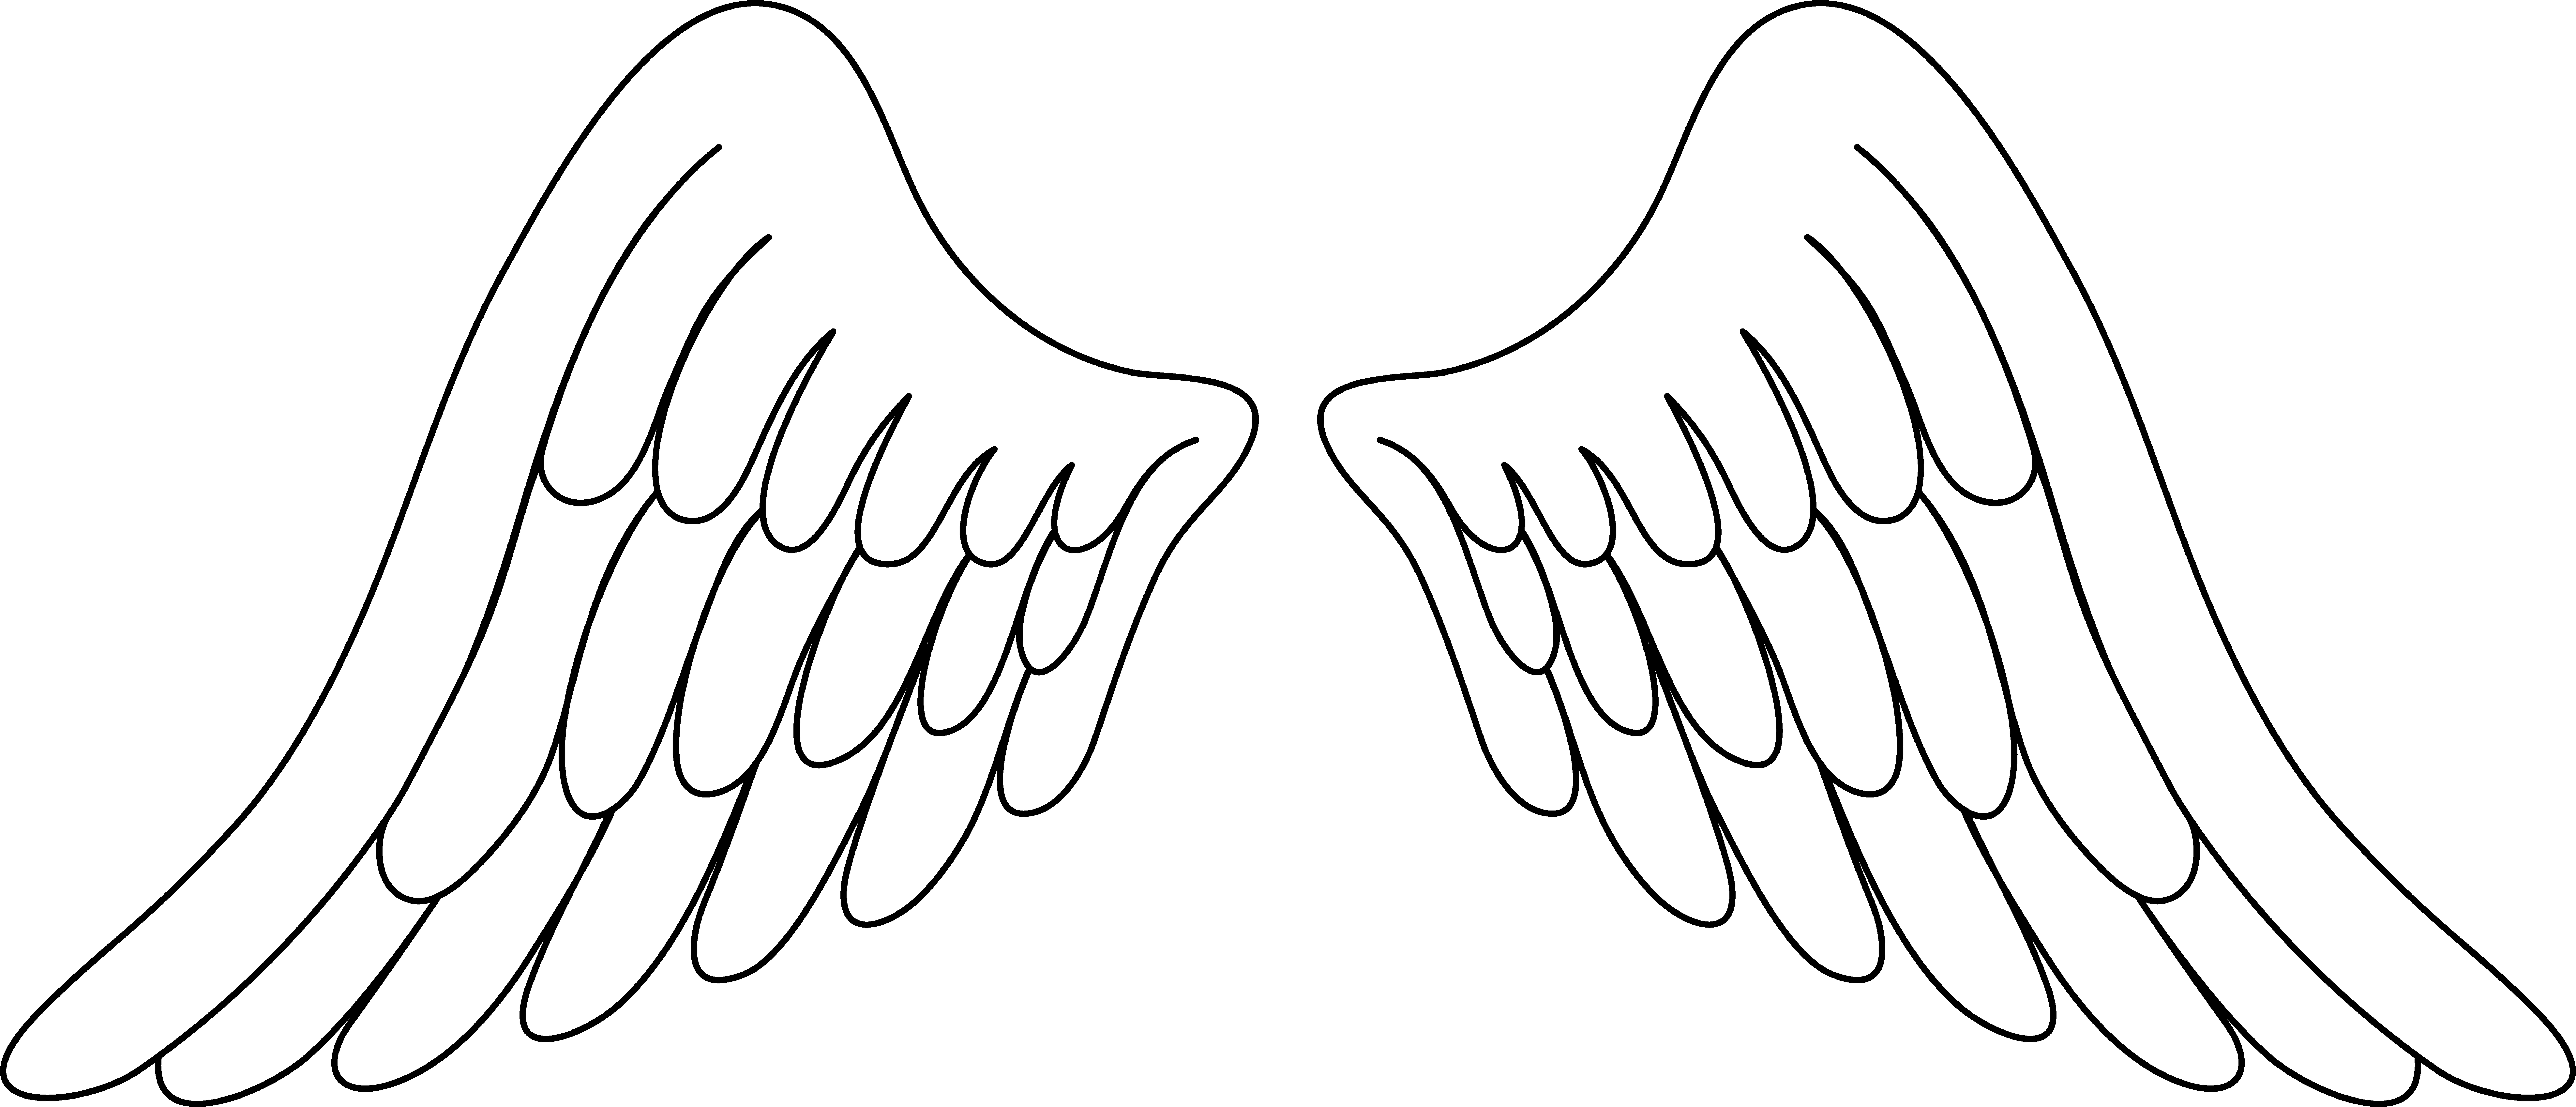 Angel wings wing clip. Shears clipart drawn